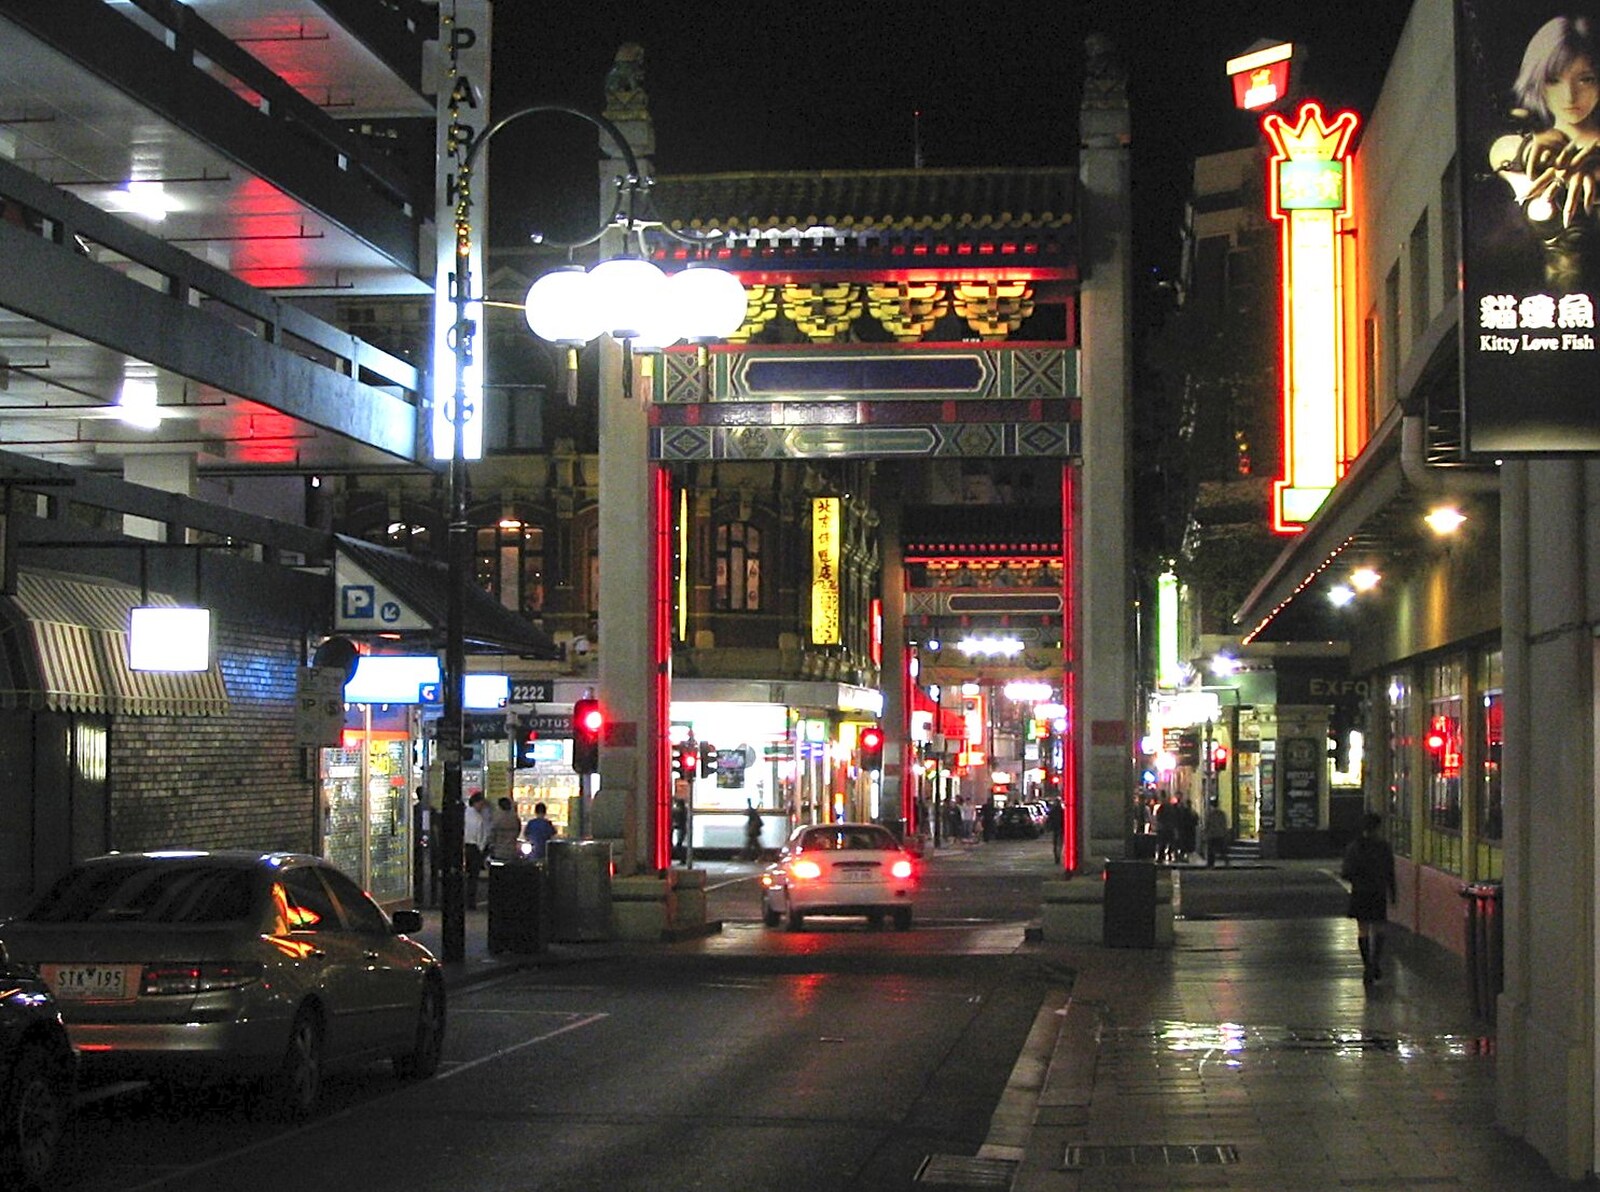 Chinatown by night from A Couple of Days in Melbourne, Victoria, Australia - 5th October 2004